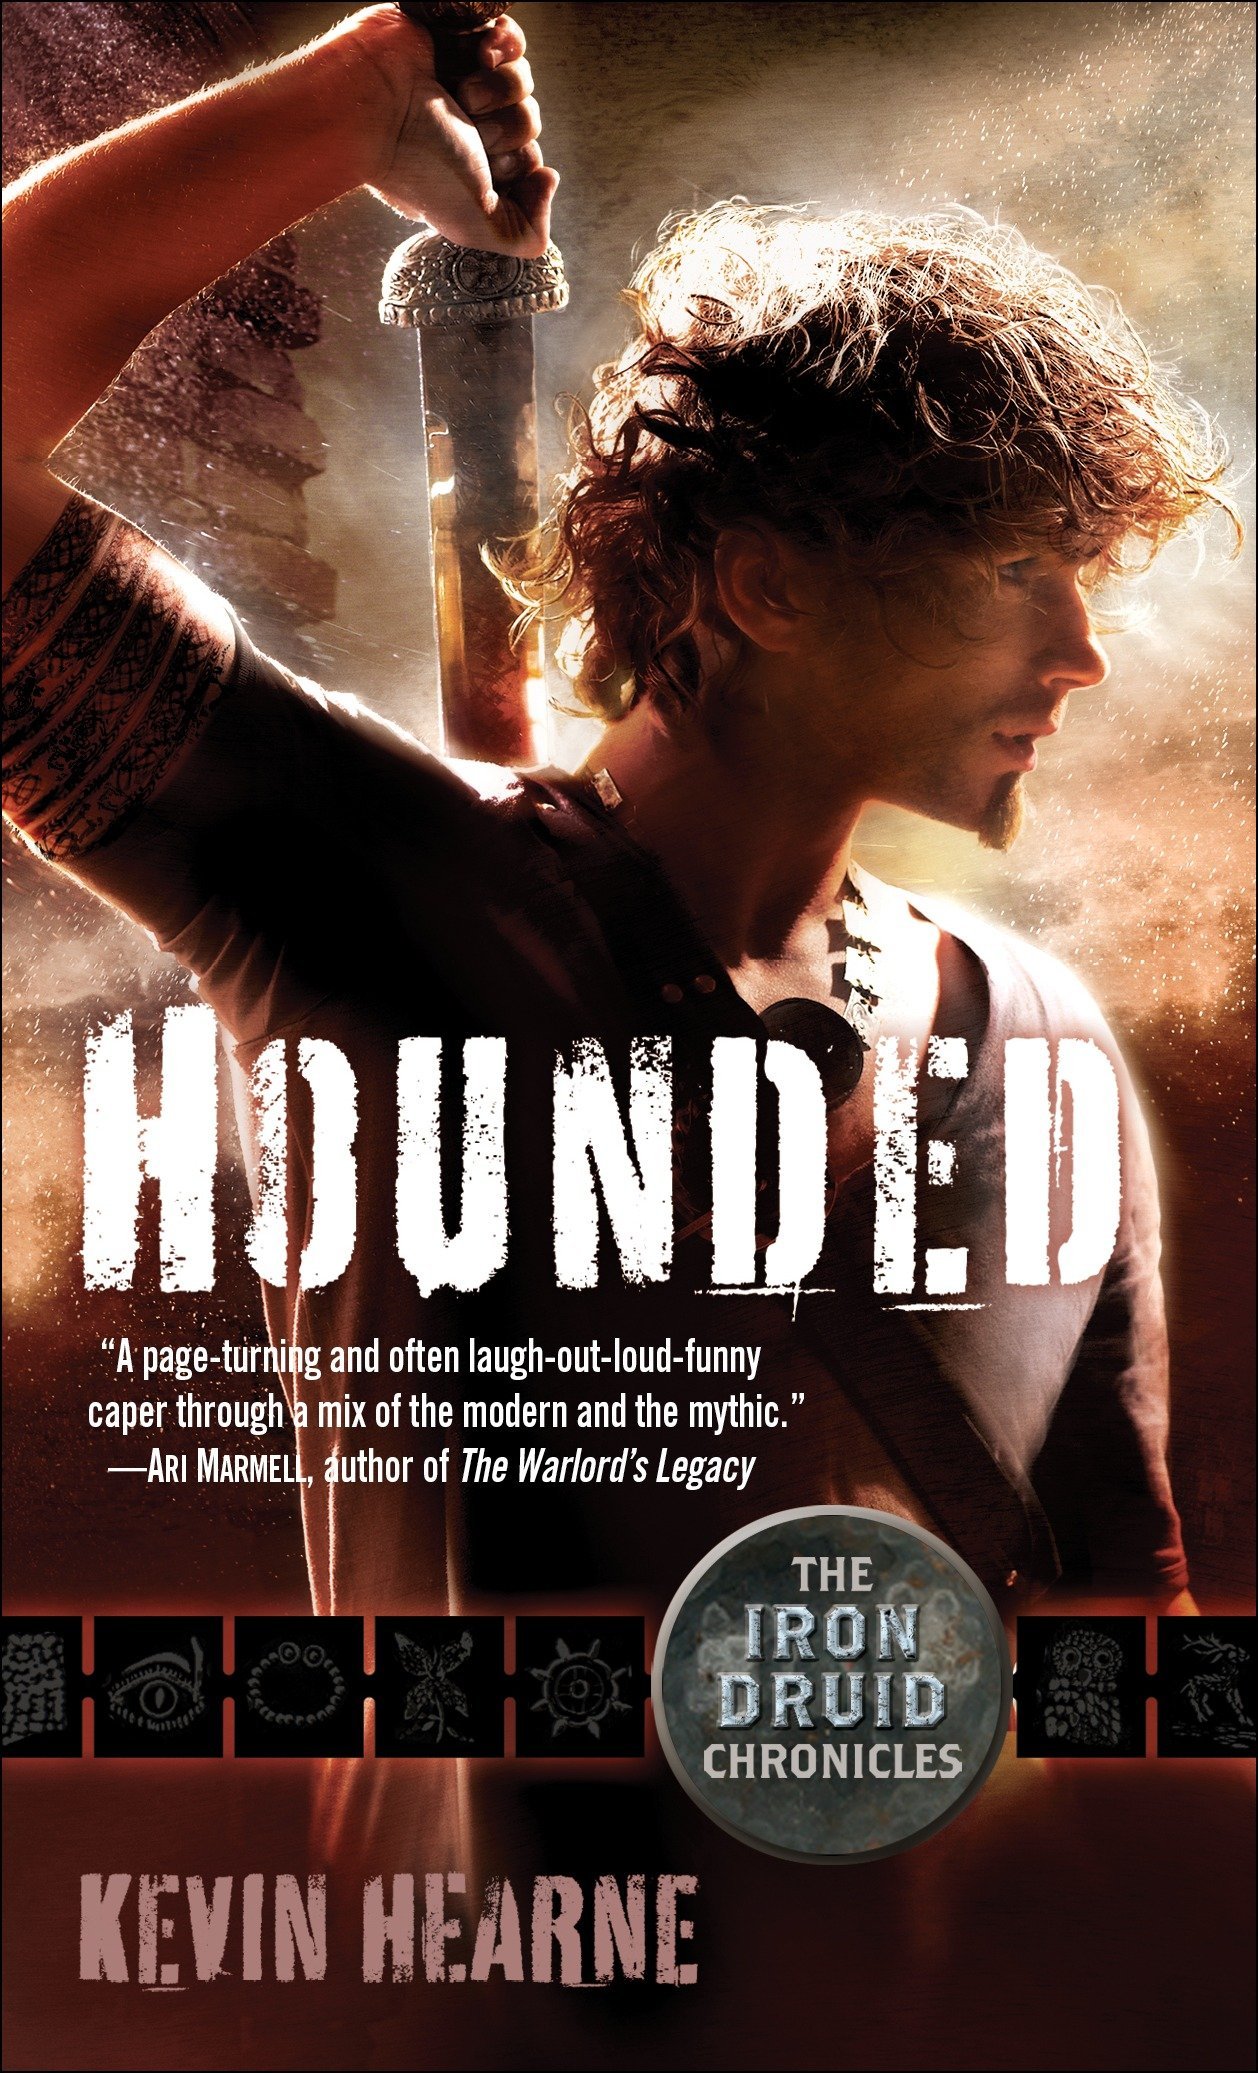 Image for "Hounded"